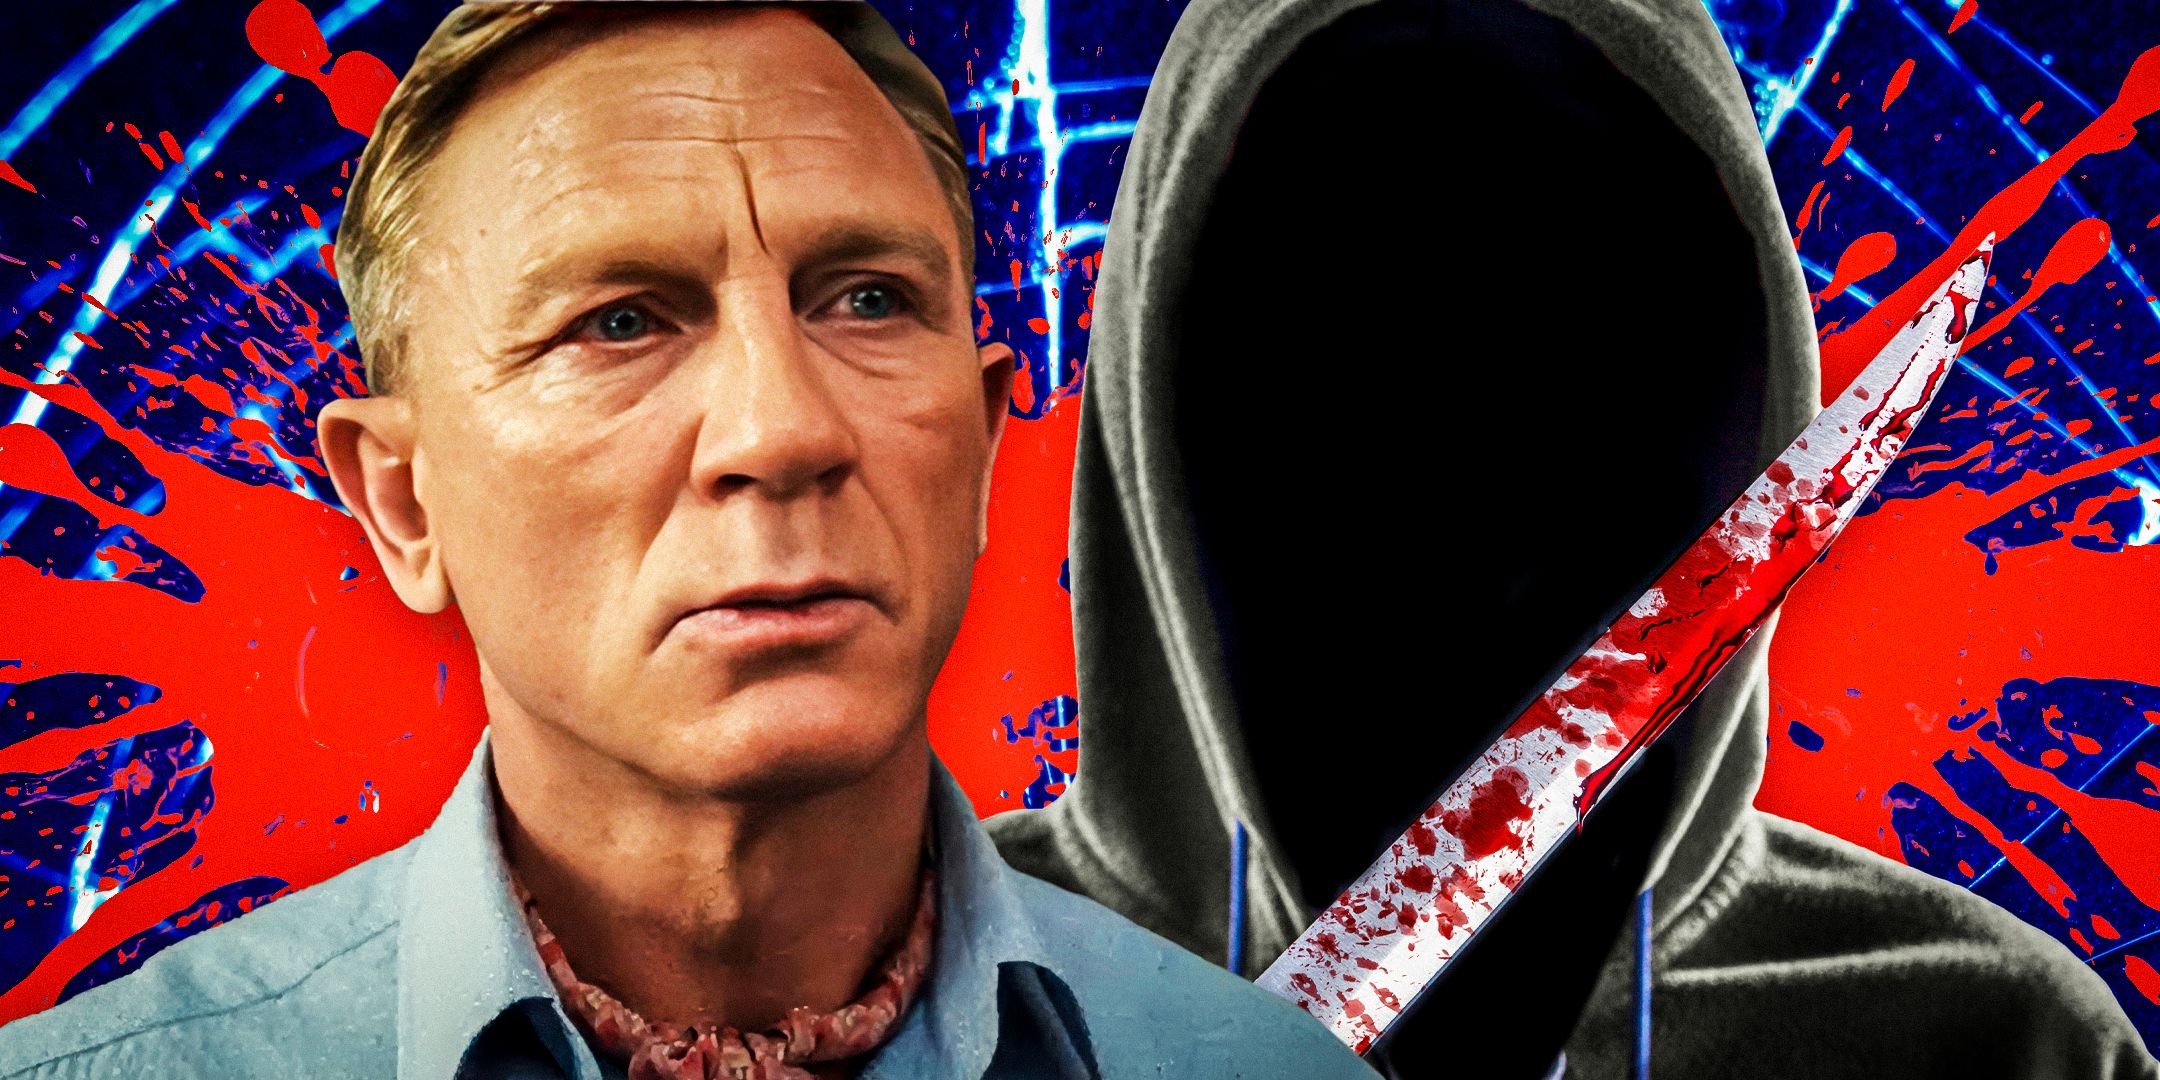 Daniel Craig as Benoit Blanc in Knives Out and an image of a hooded killer holding a bloody knife